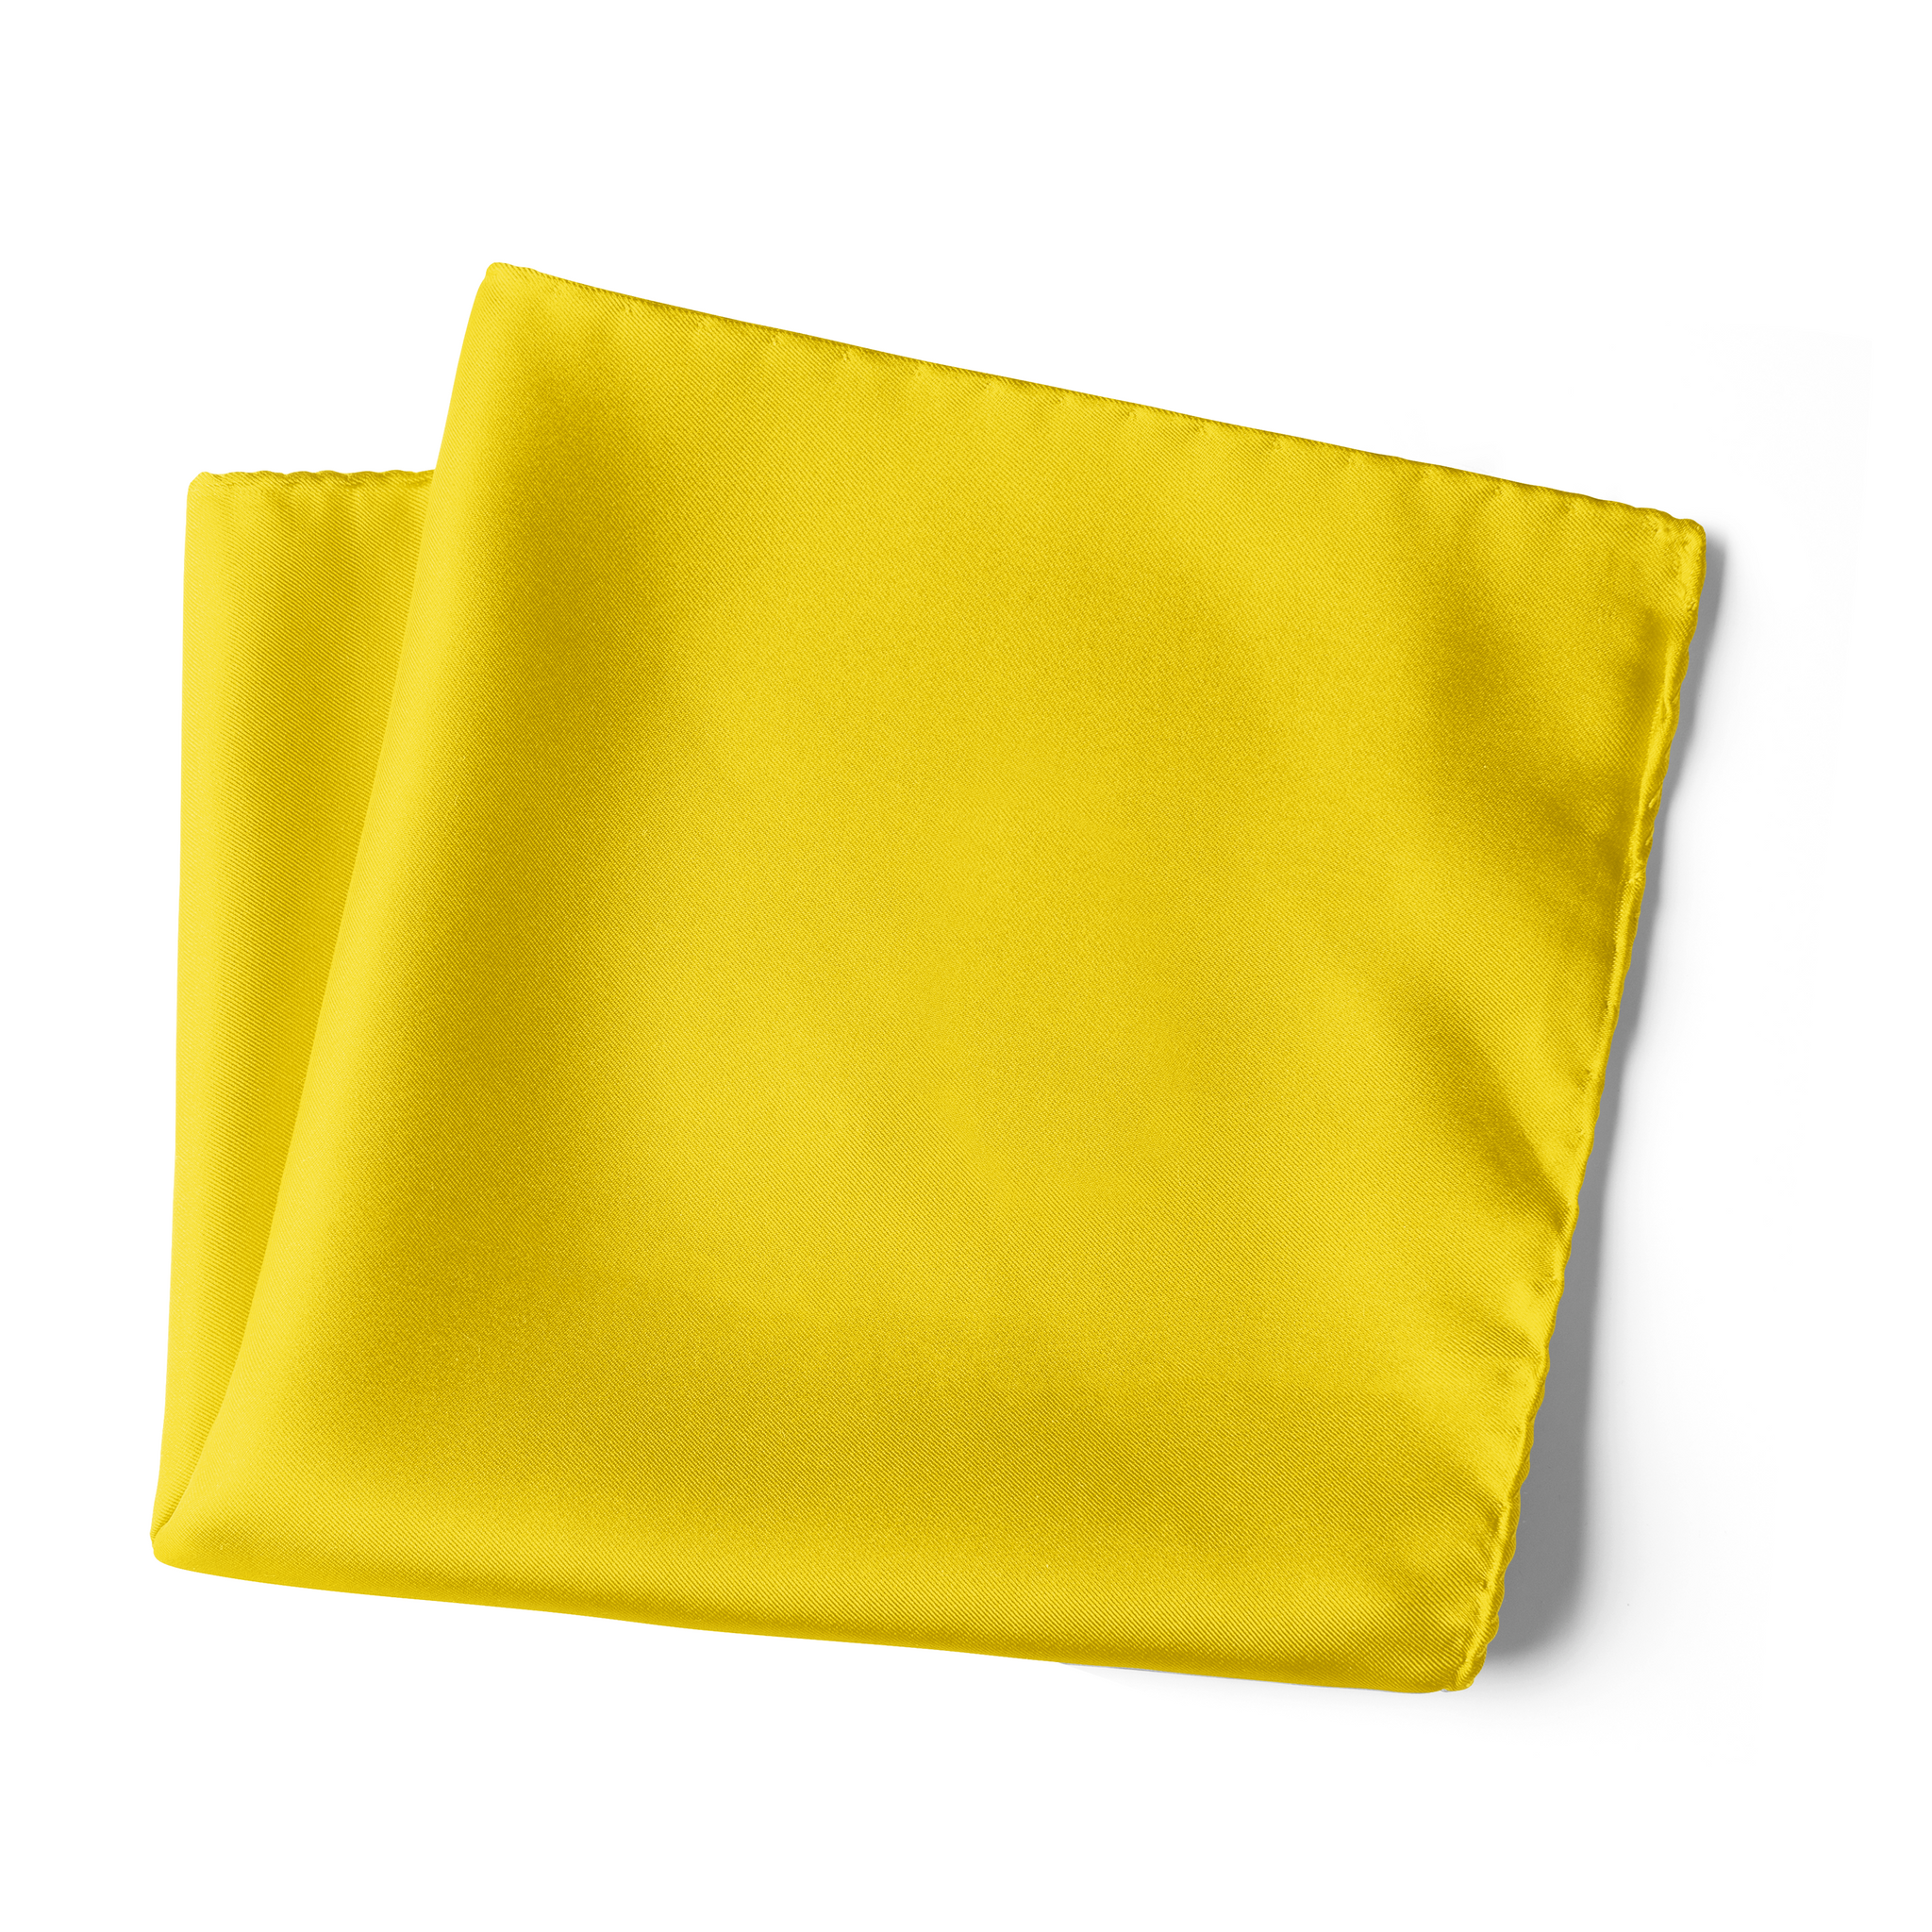 Chokore Sunshine Yellow Pocket Square, from the Solids Line